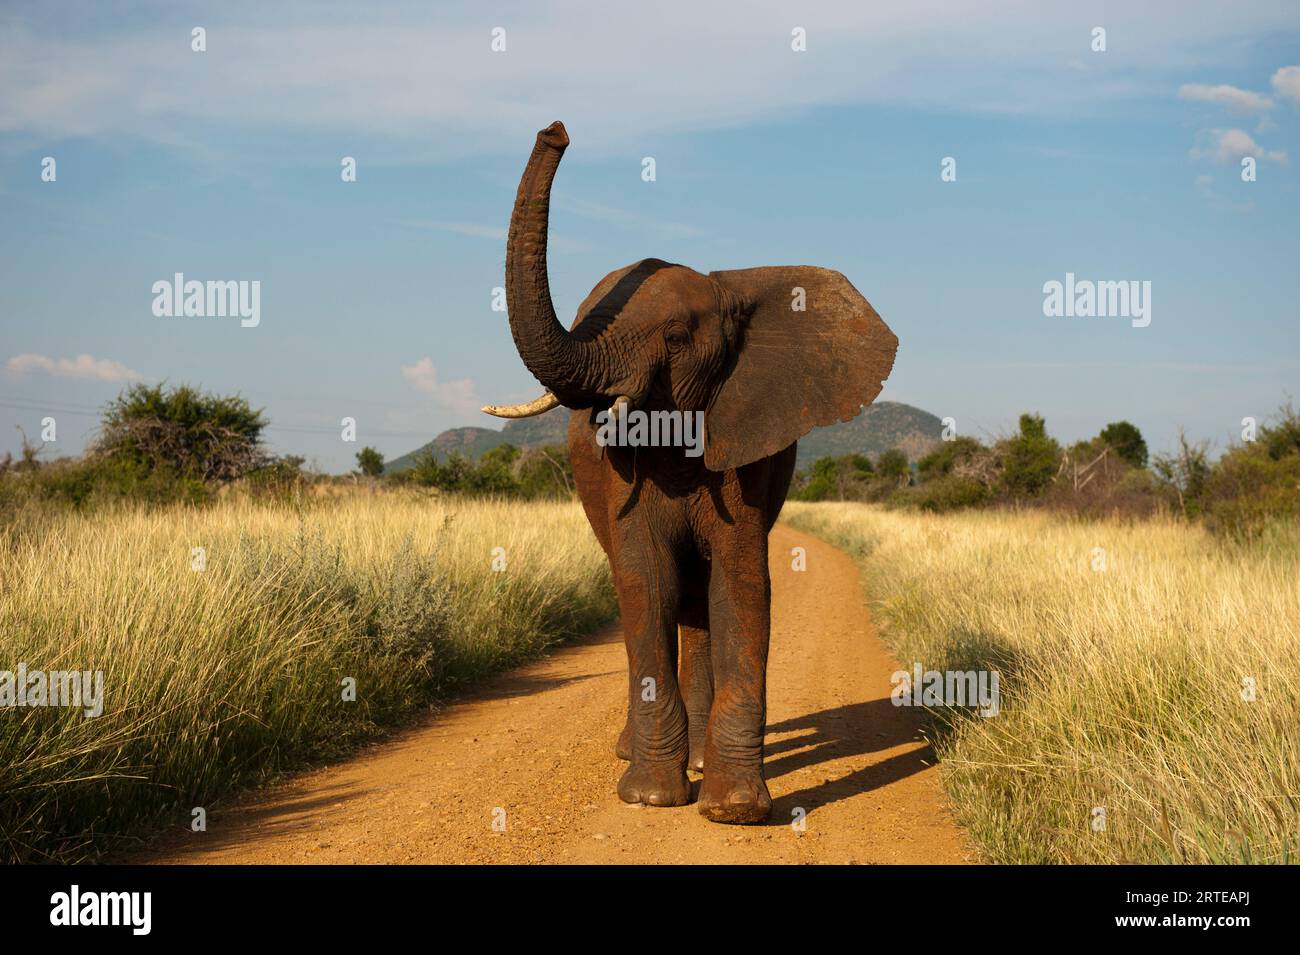 African elephant (Loxodonta africana) stands alone on a dirt road with its trunk raised in the air in Madikwe Game Reserve, South Africa; South Africa Stock Photo